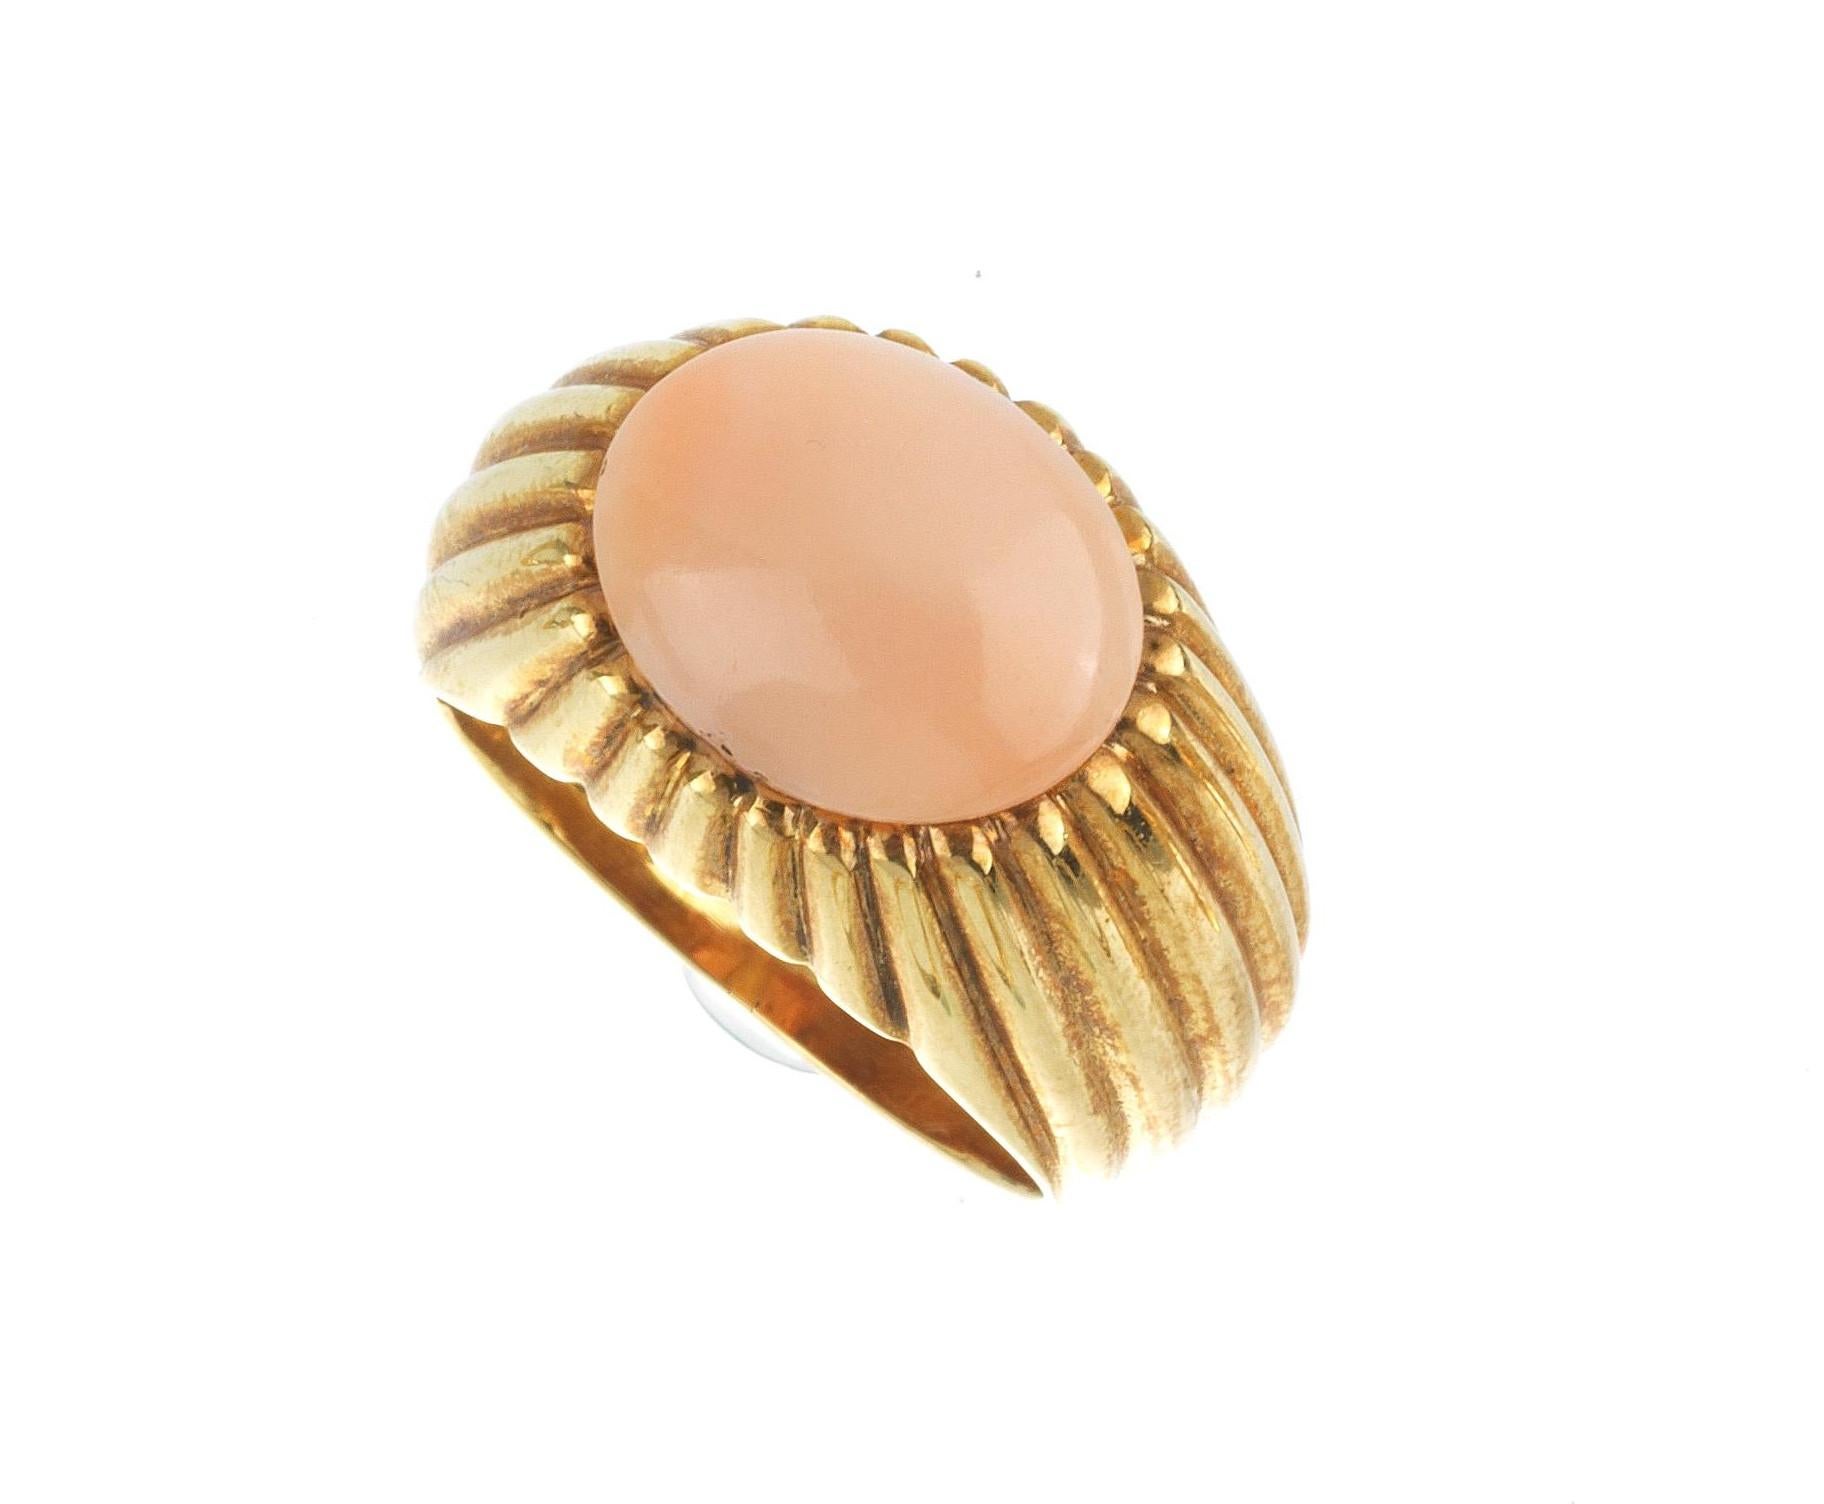 The oval cabochon corallium rubrum approximately 13mm x 11mm mounted in gold.
Weight : 9,5gr
Size : 7